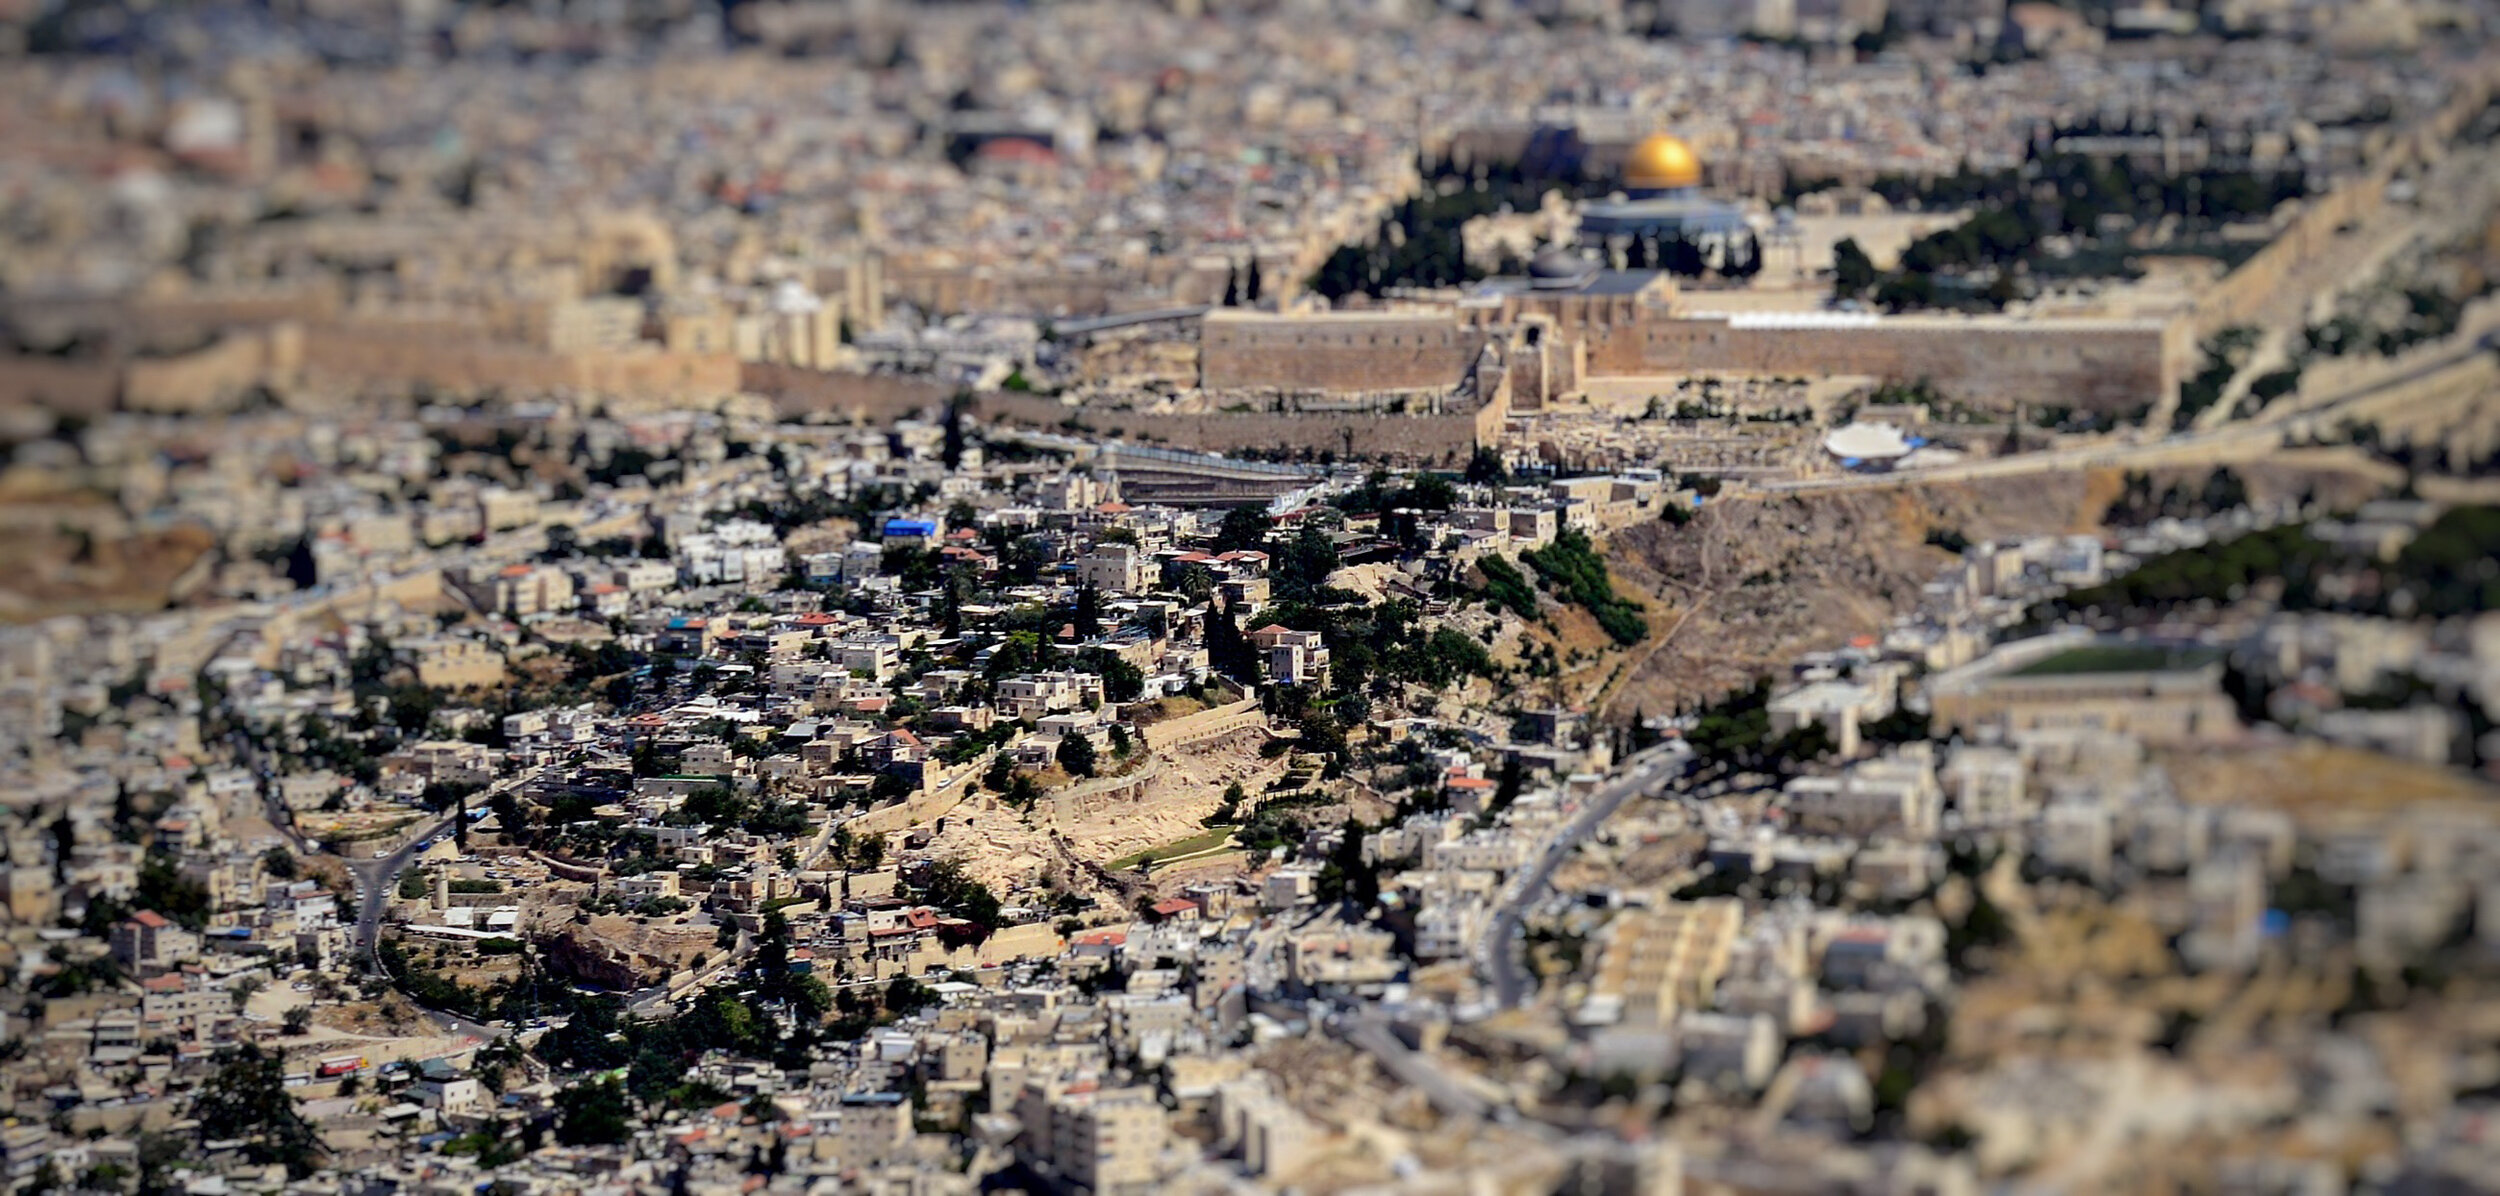 City_of_David,_Wadi_Hilweh_–_Palestinian_village,_Israeli_settlement,_Archaeological_site_–_from_the_air.jpg